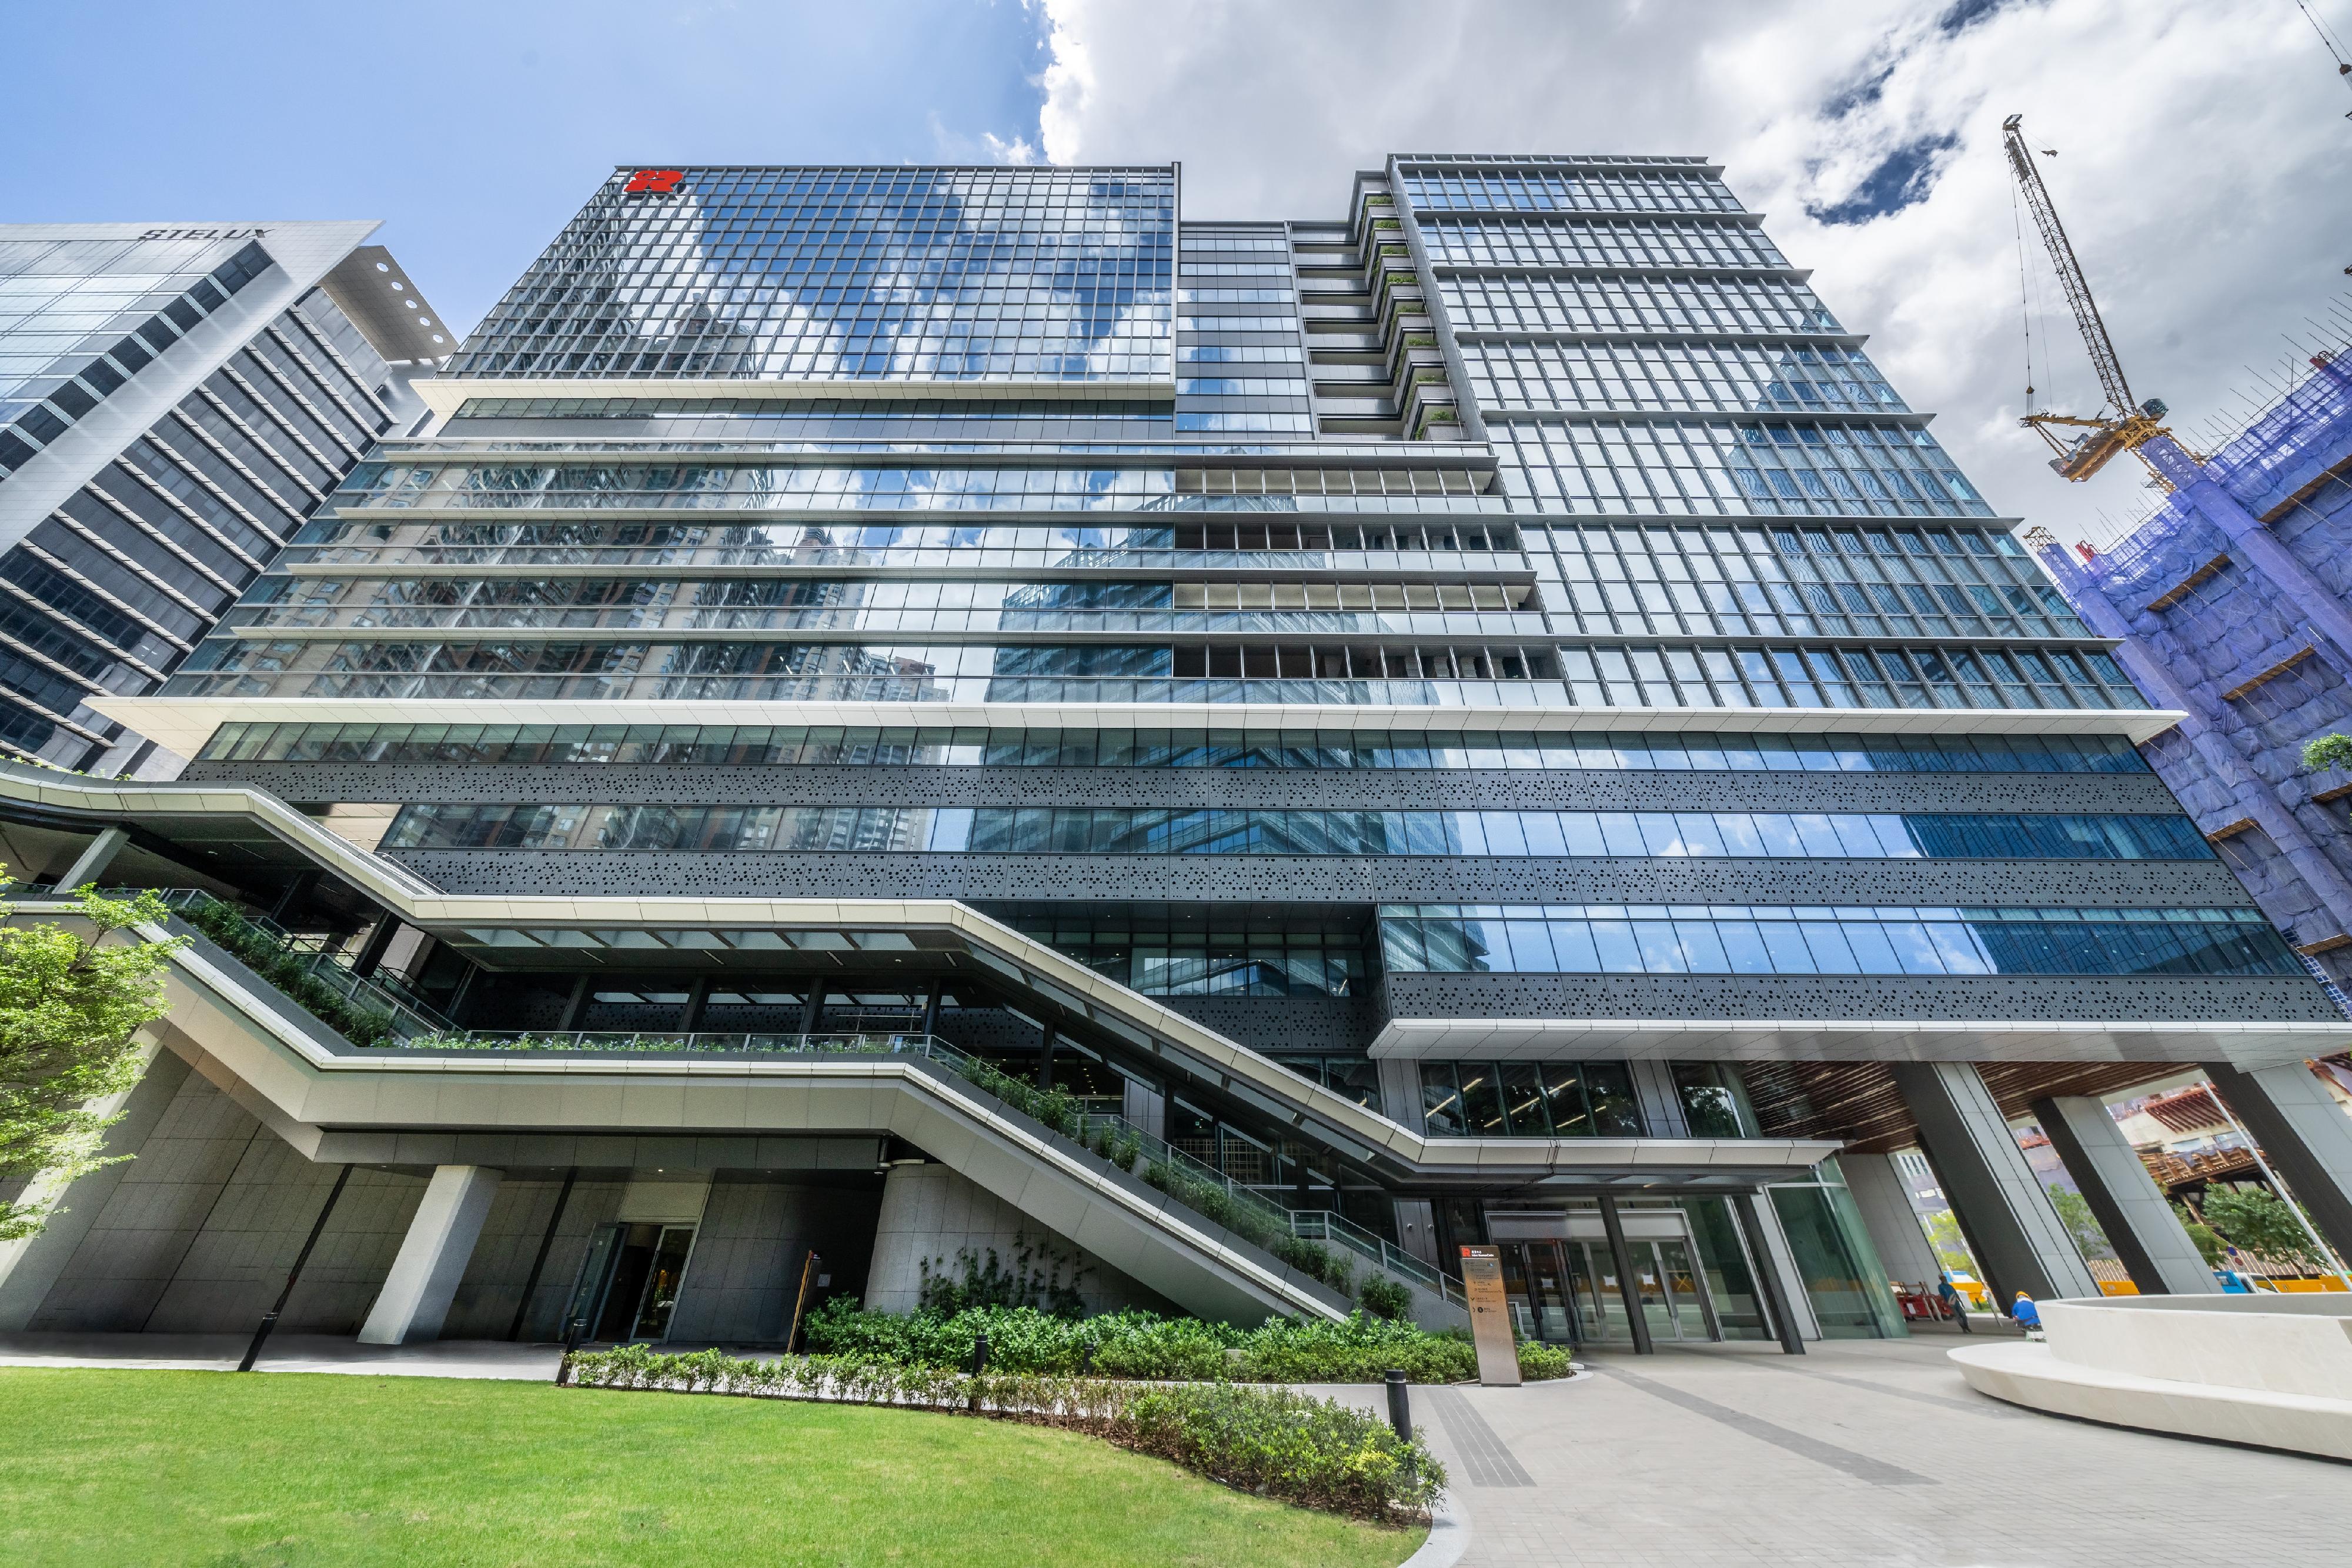 The Inland Revenue Centre is located at the Kai Tak Development Area adjacent to the Trade and Industry Tower and MTR Kai Tak Station. A number of environmentally friendly, energy-saving facilities and green features have been incorporated into the building's design.